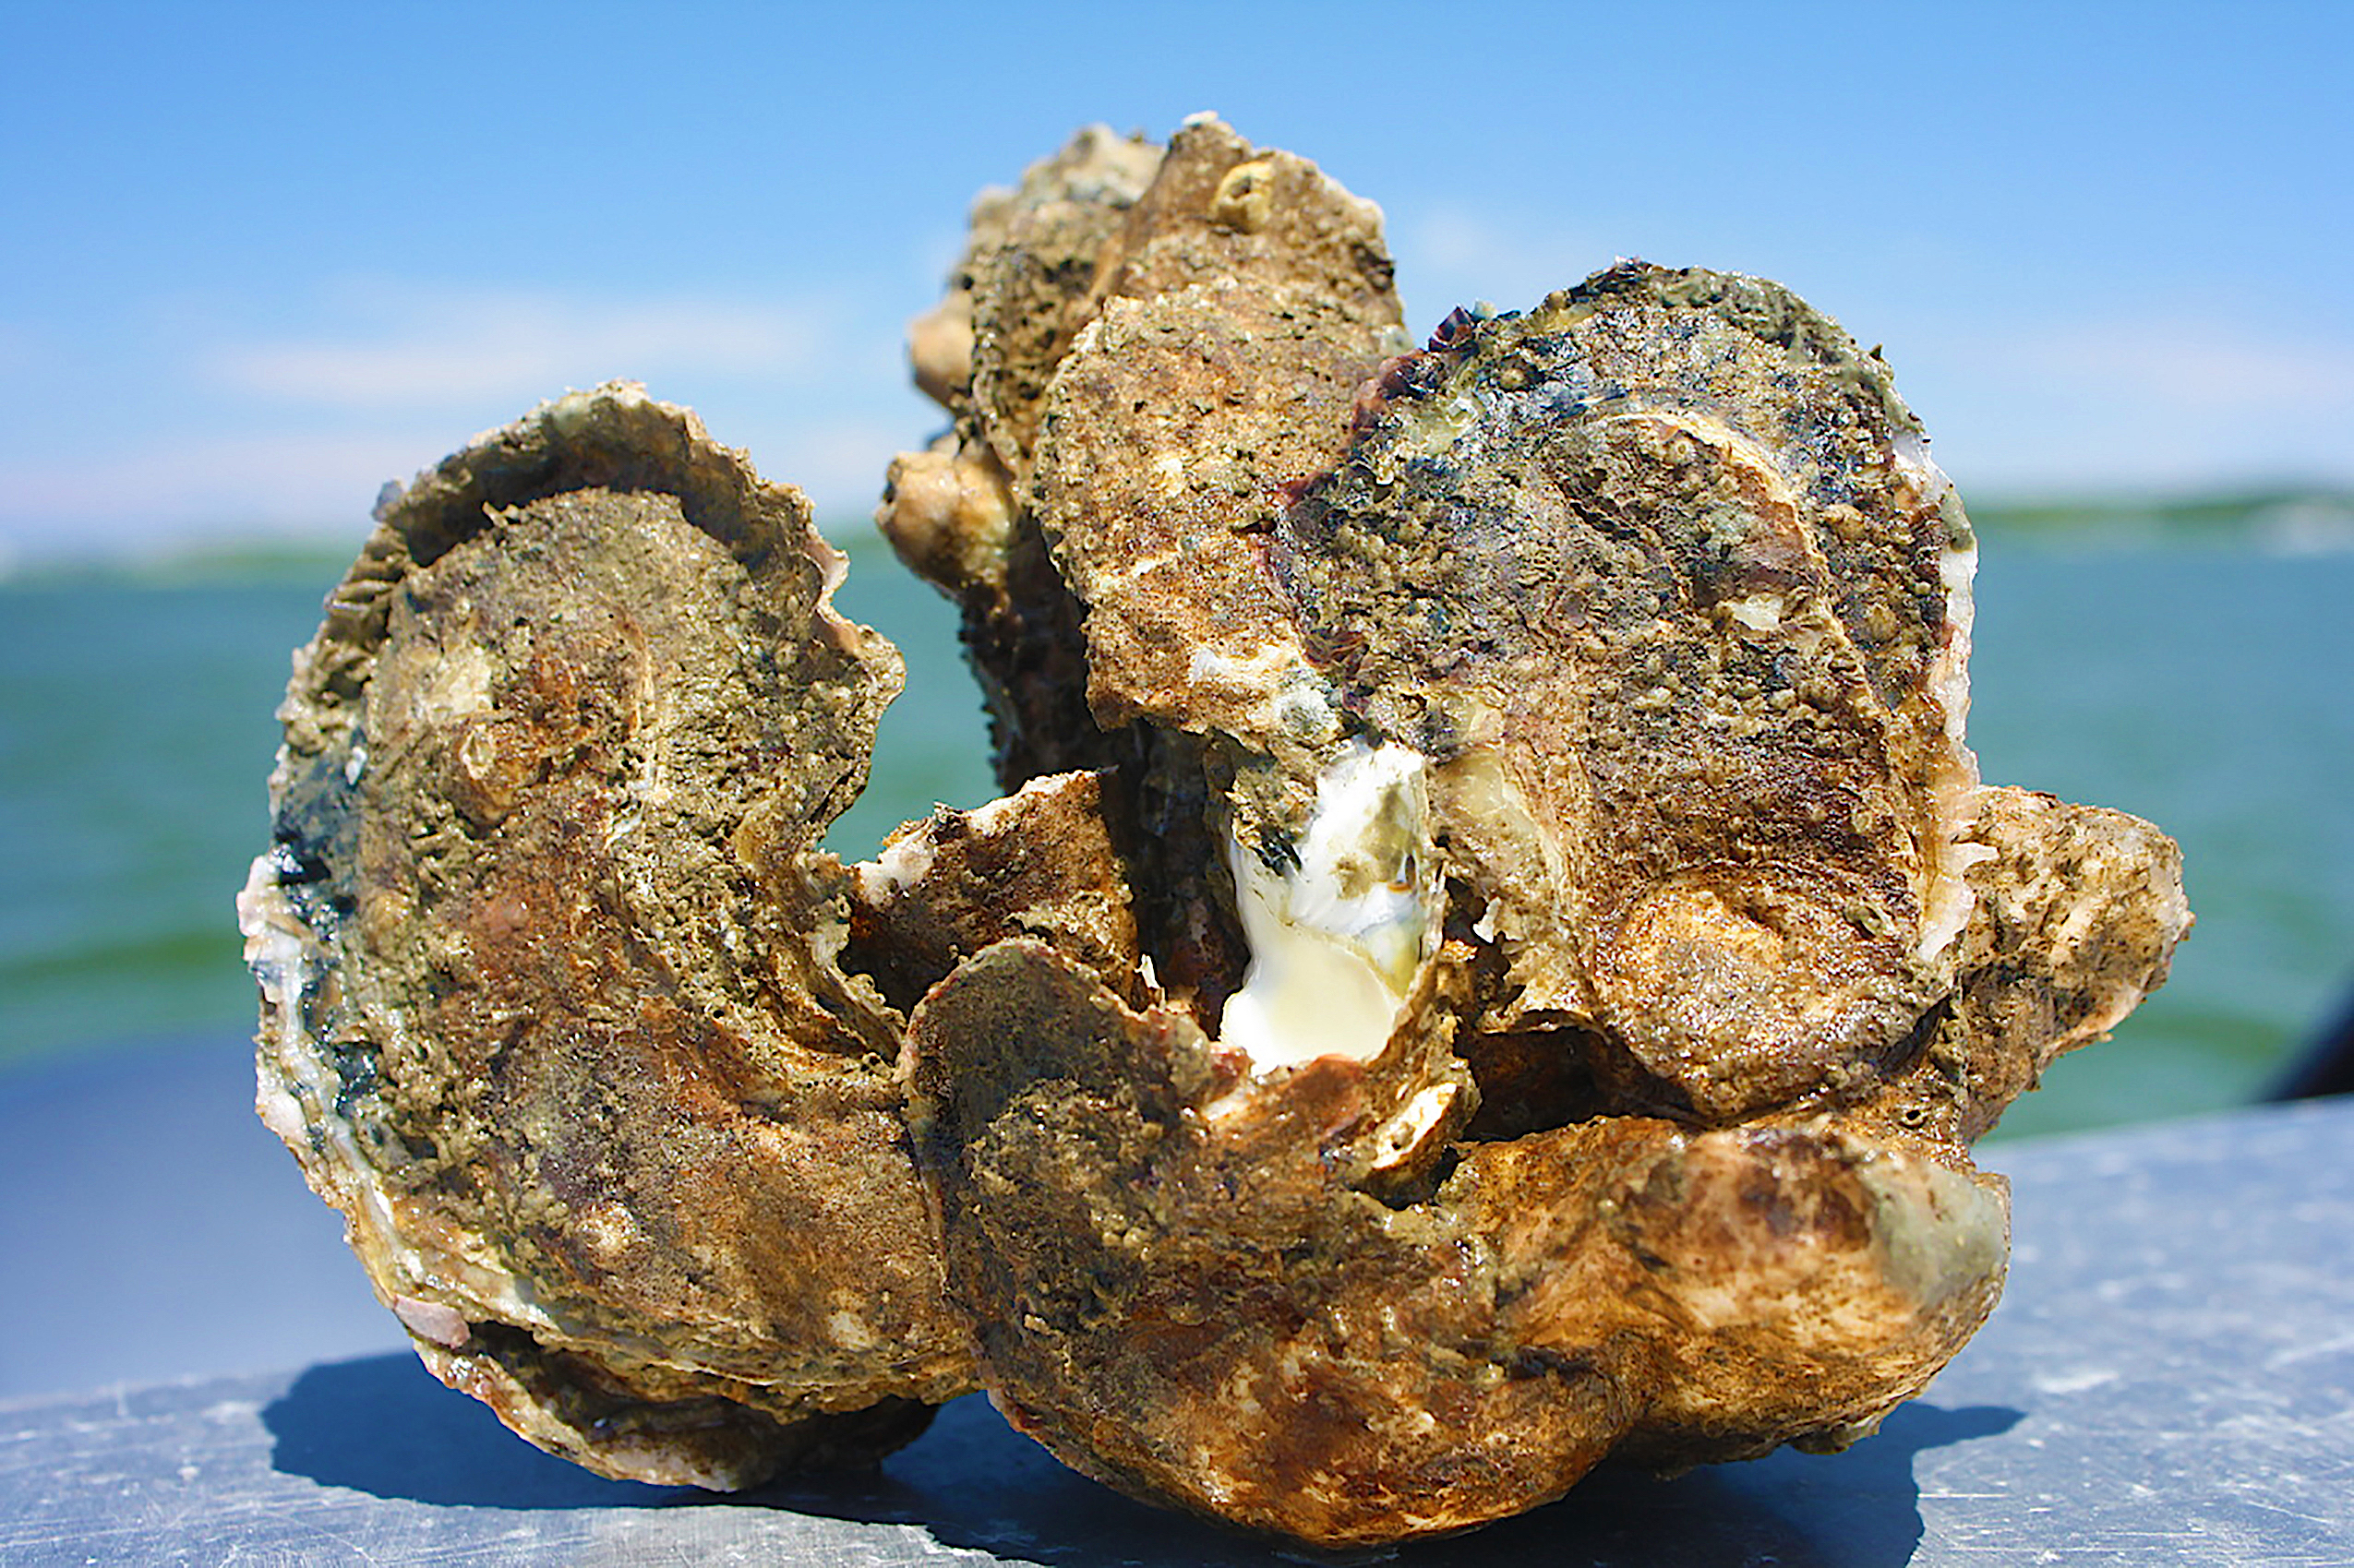 Oysters from a feeder stream to the Chesapeake Bay, courtesy of NOAA